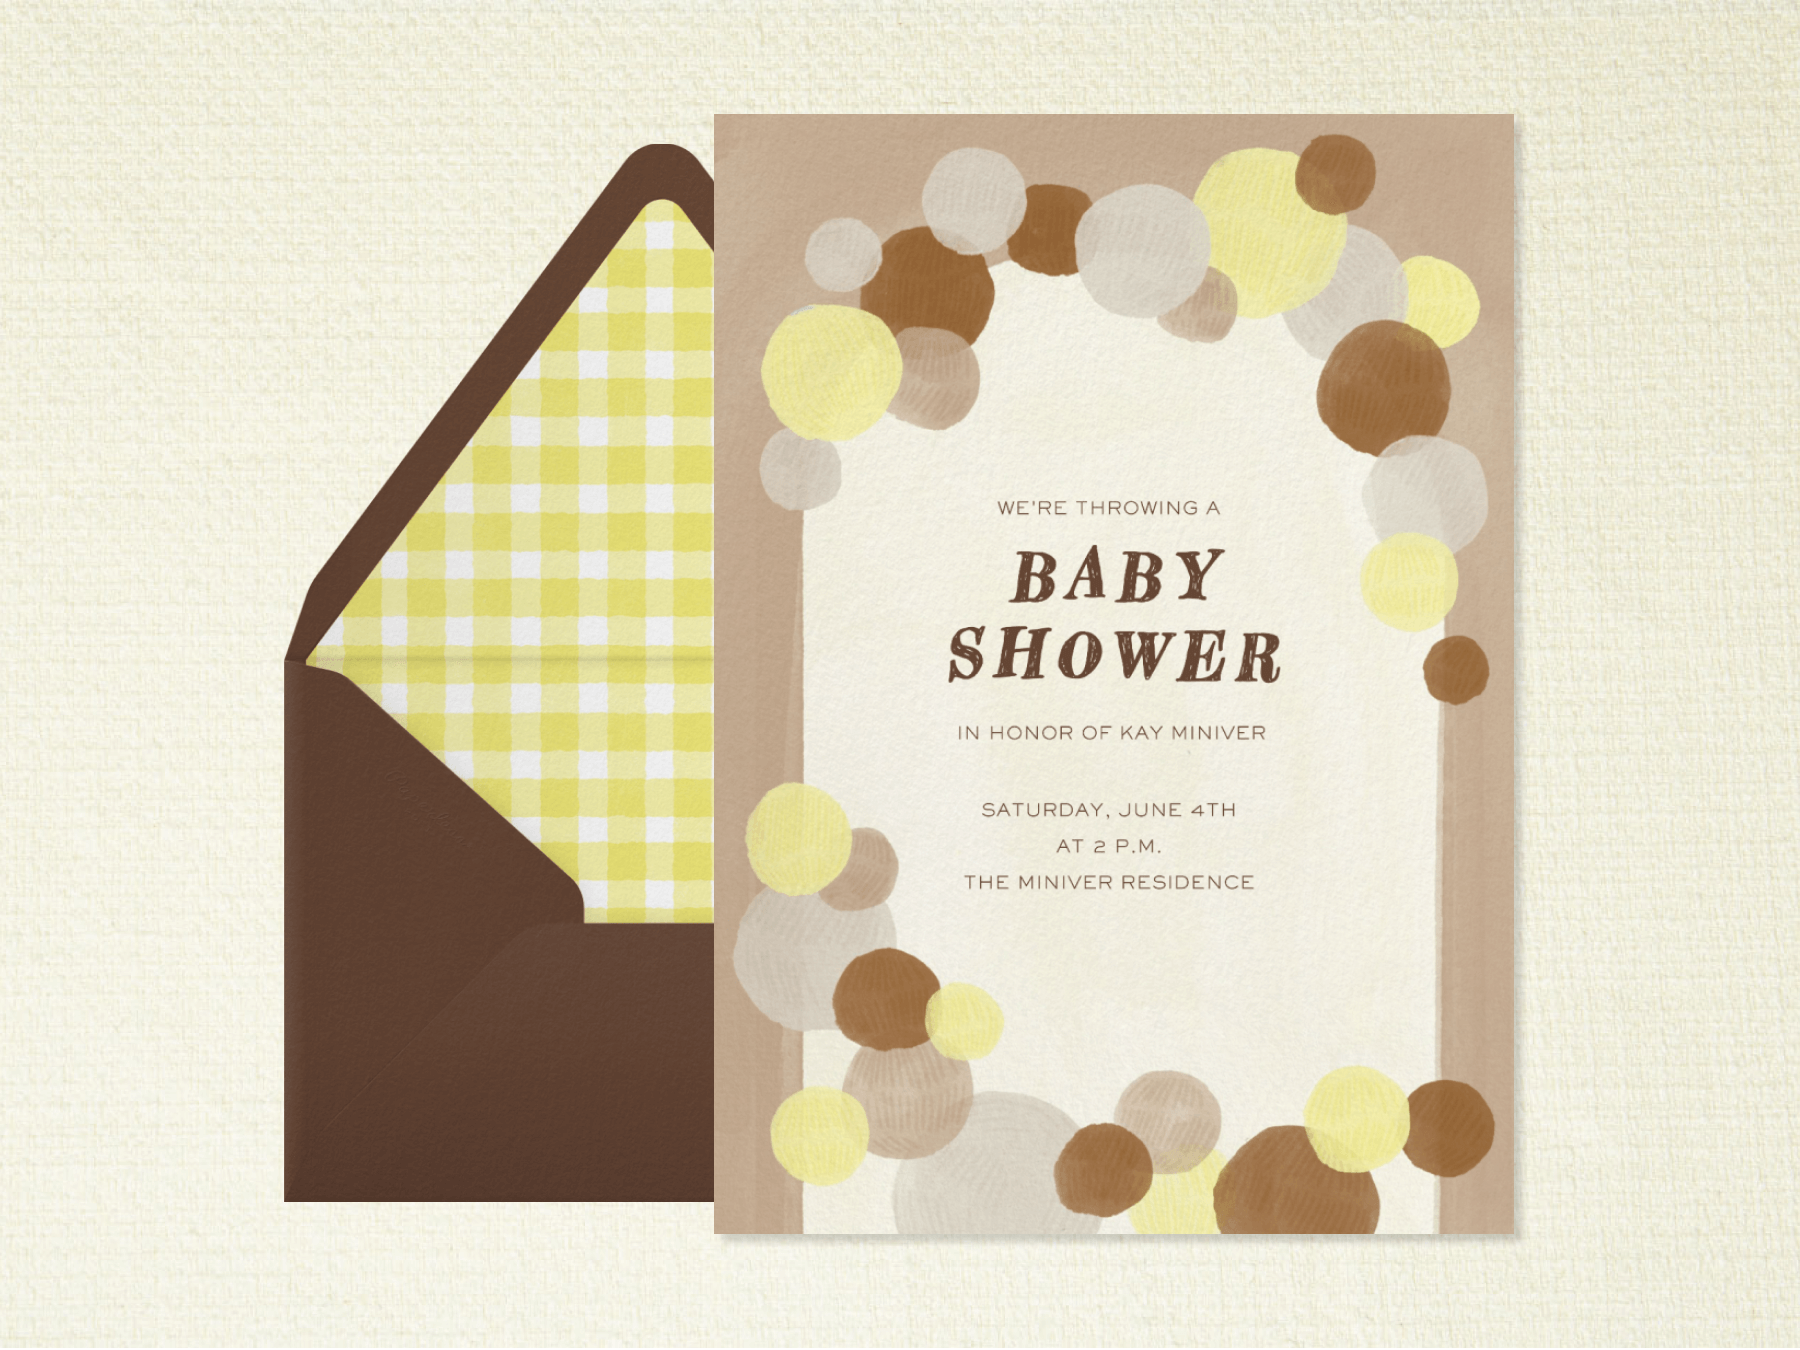 A baby shower invitation with brown, gray, and yellow circles representing balloons form an arch around the party details, beside a brown envelope with lime green gingham liner.